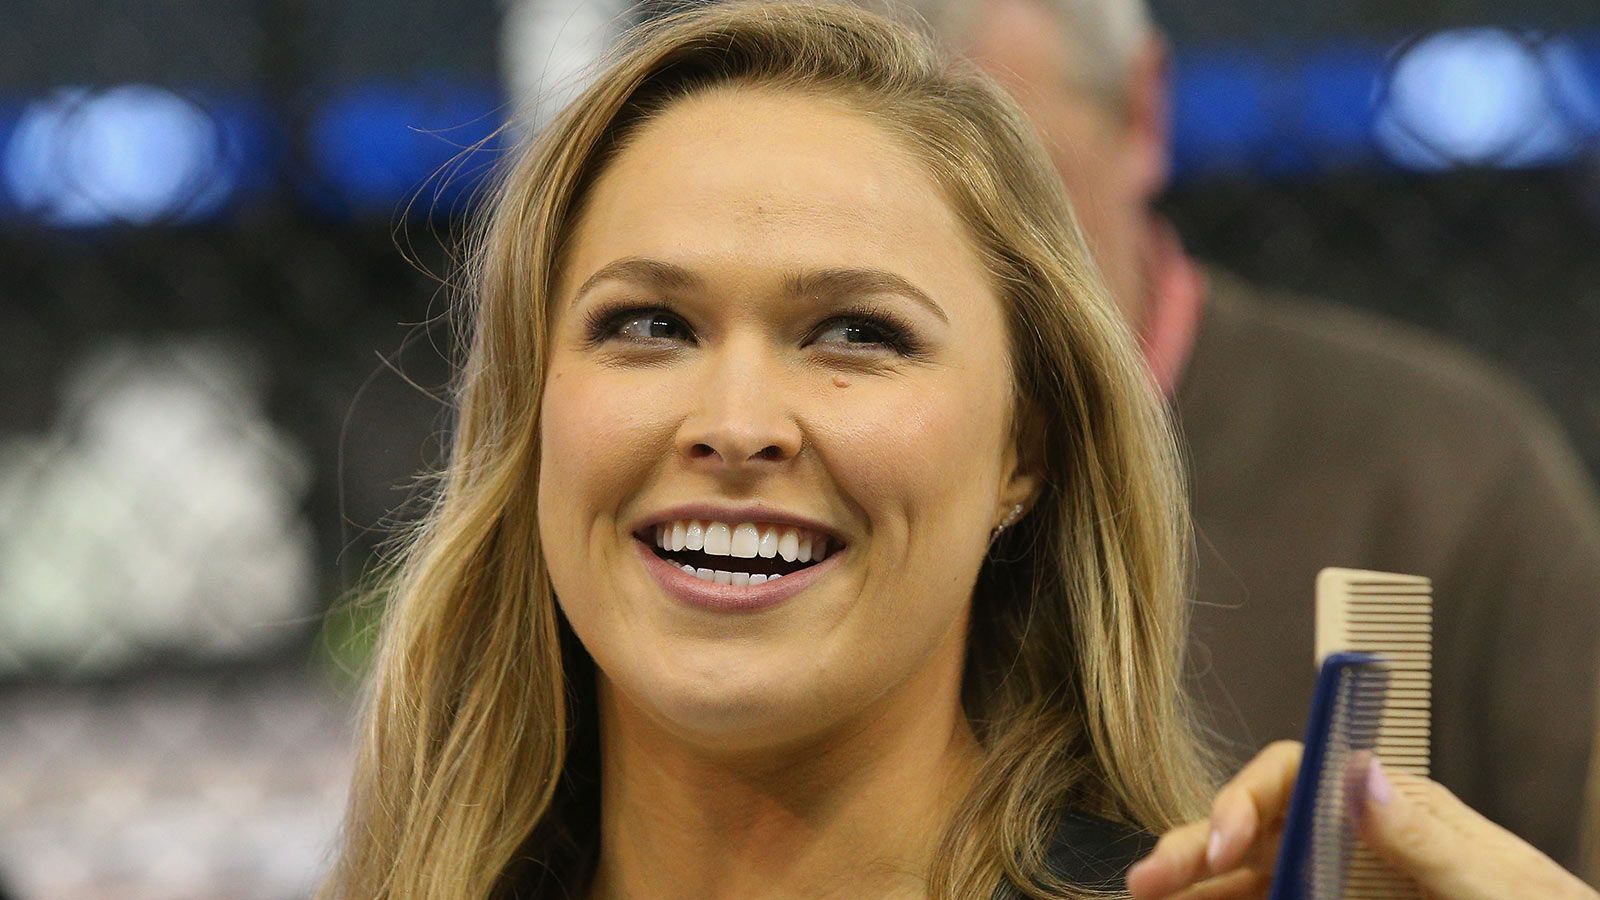 Ronda Rousey joins the Lifetime Network with three movie deal